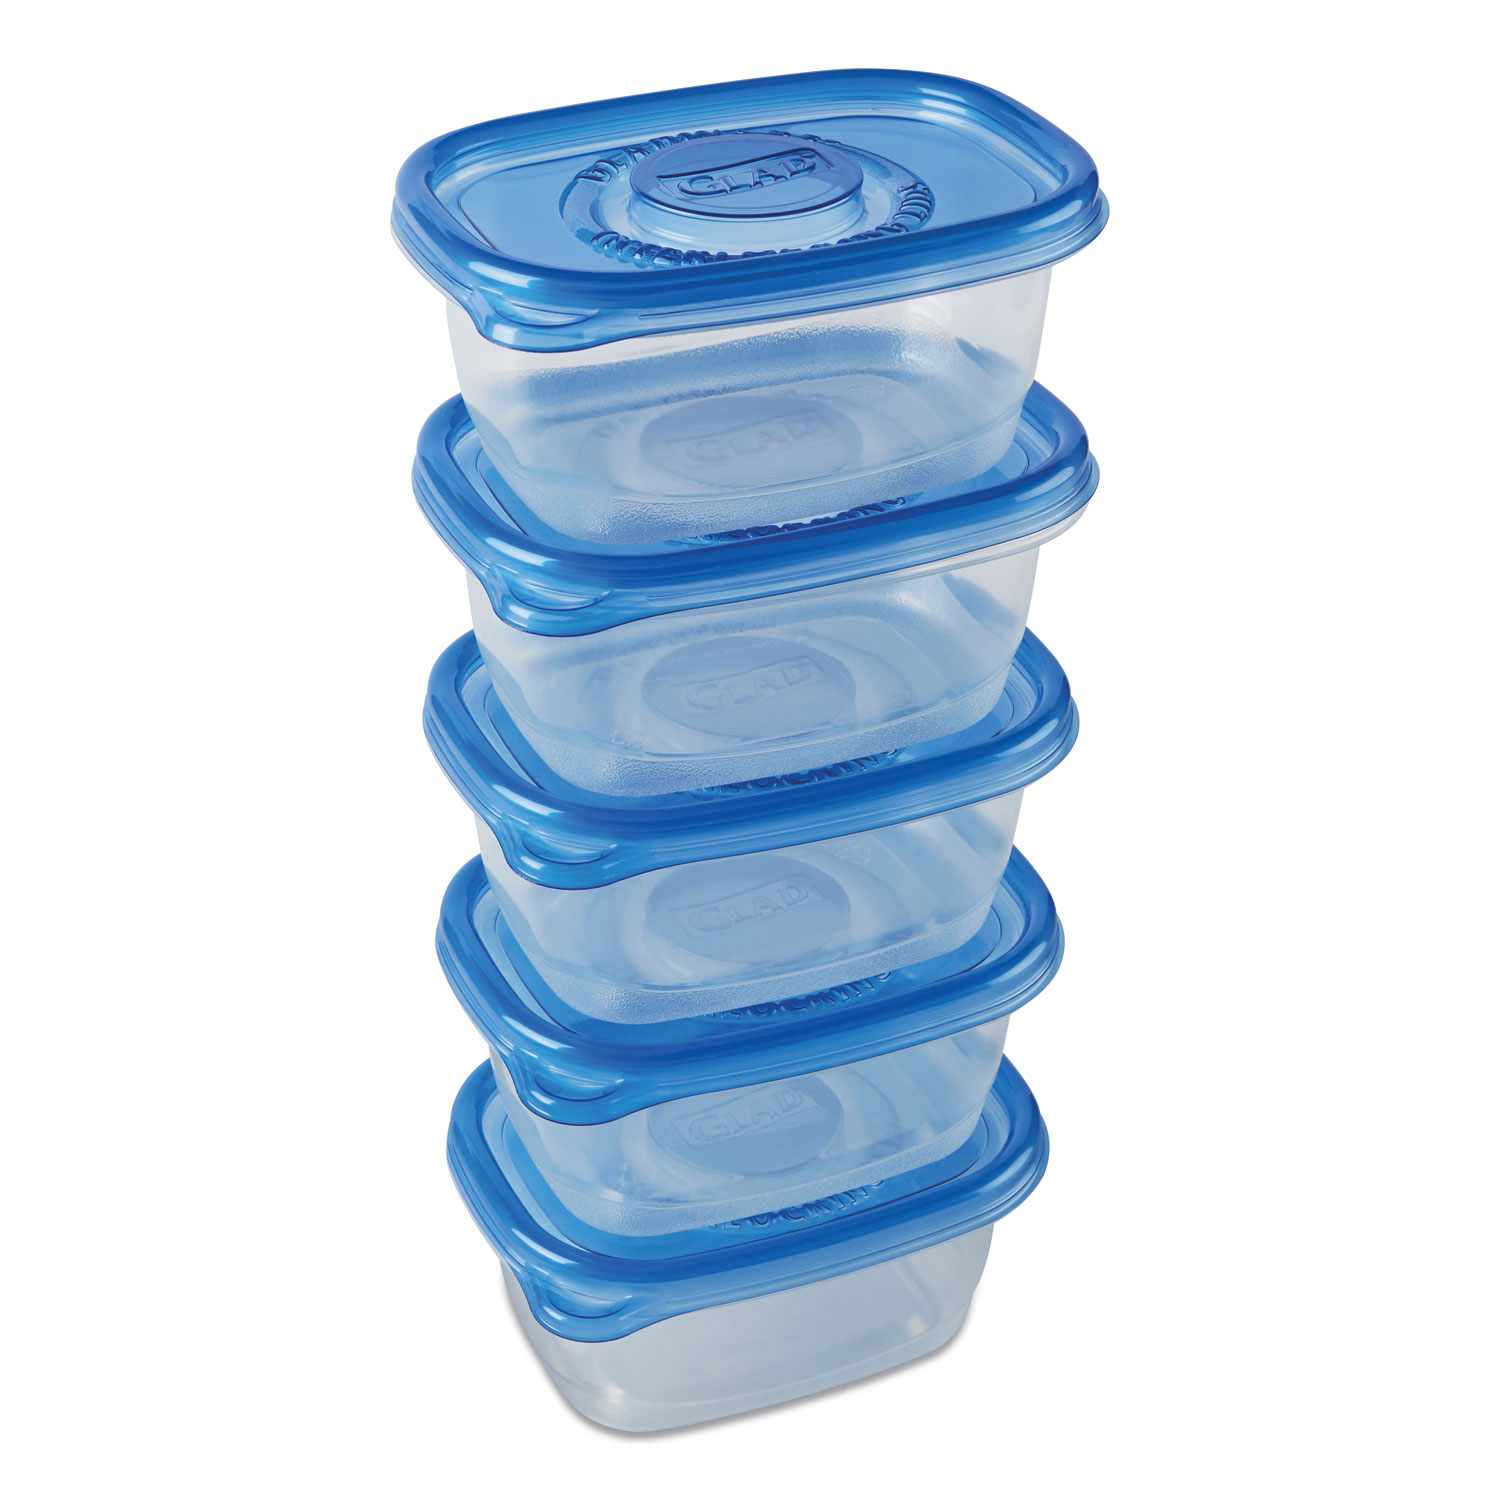  Glad CLO 60796 Soup and Salad Food Storage Containers, 24 oz, 5/Pack, 6 Packs/Carton (CLO60796) 